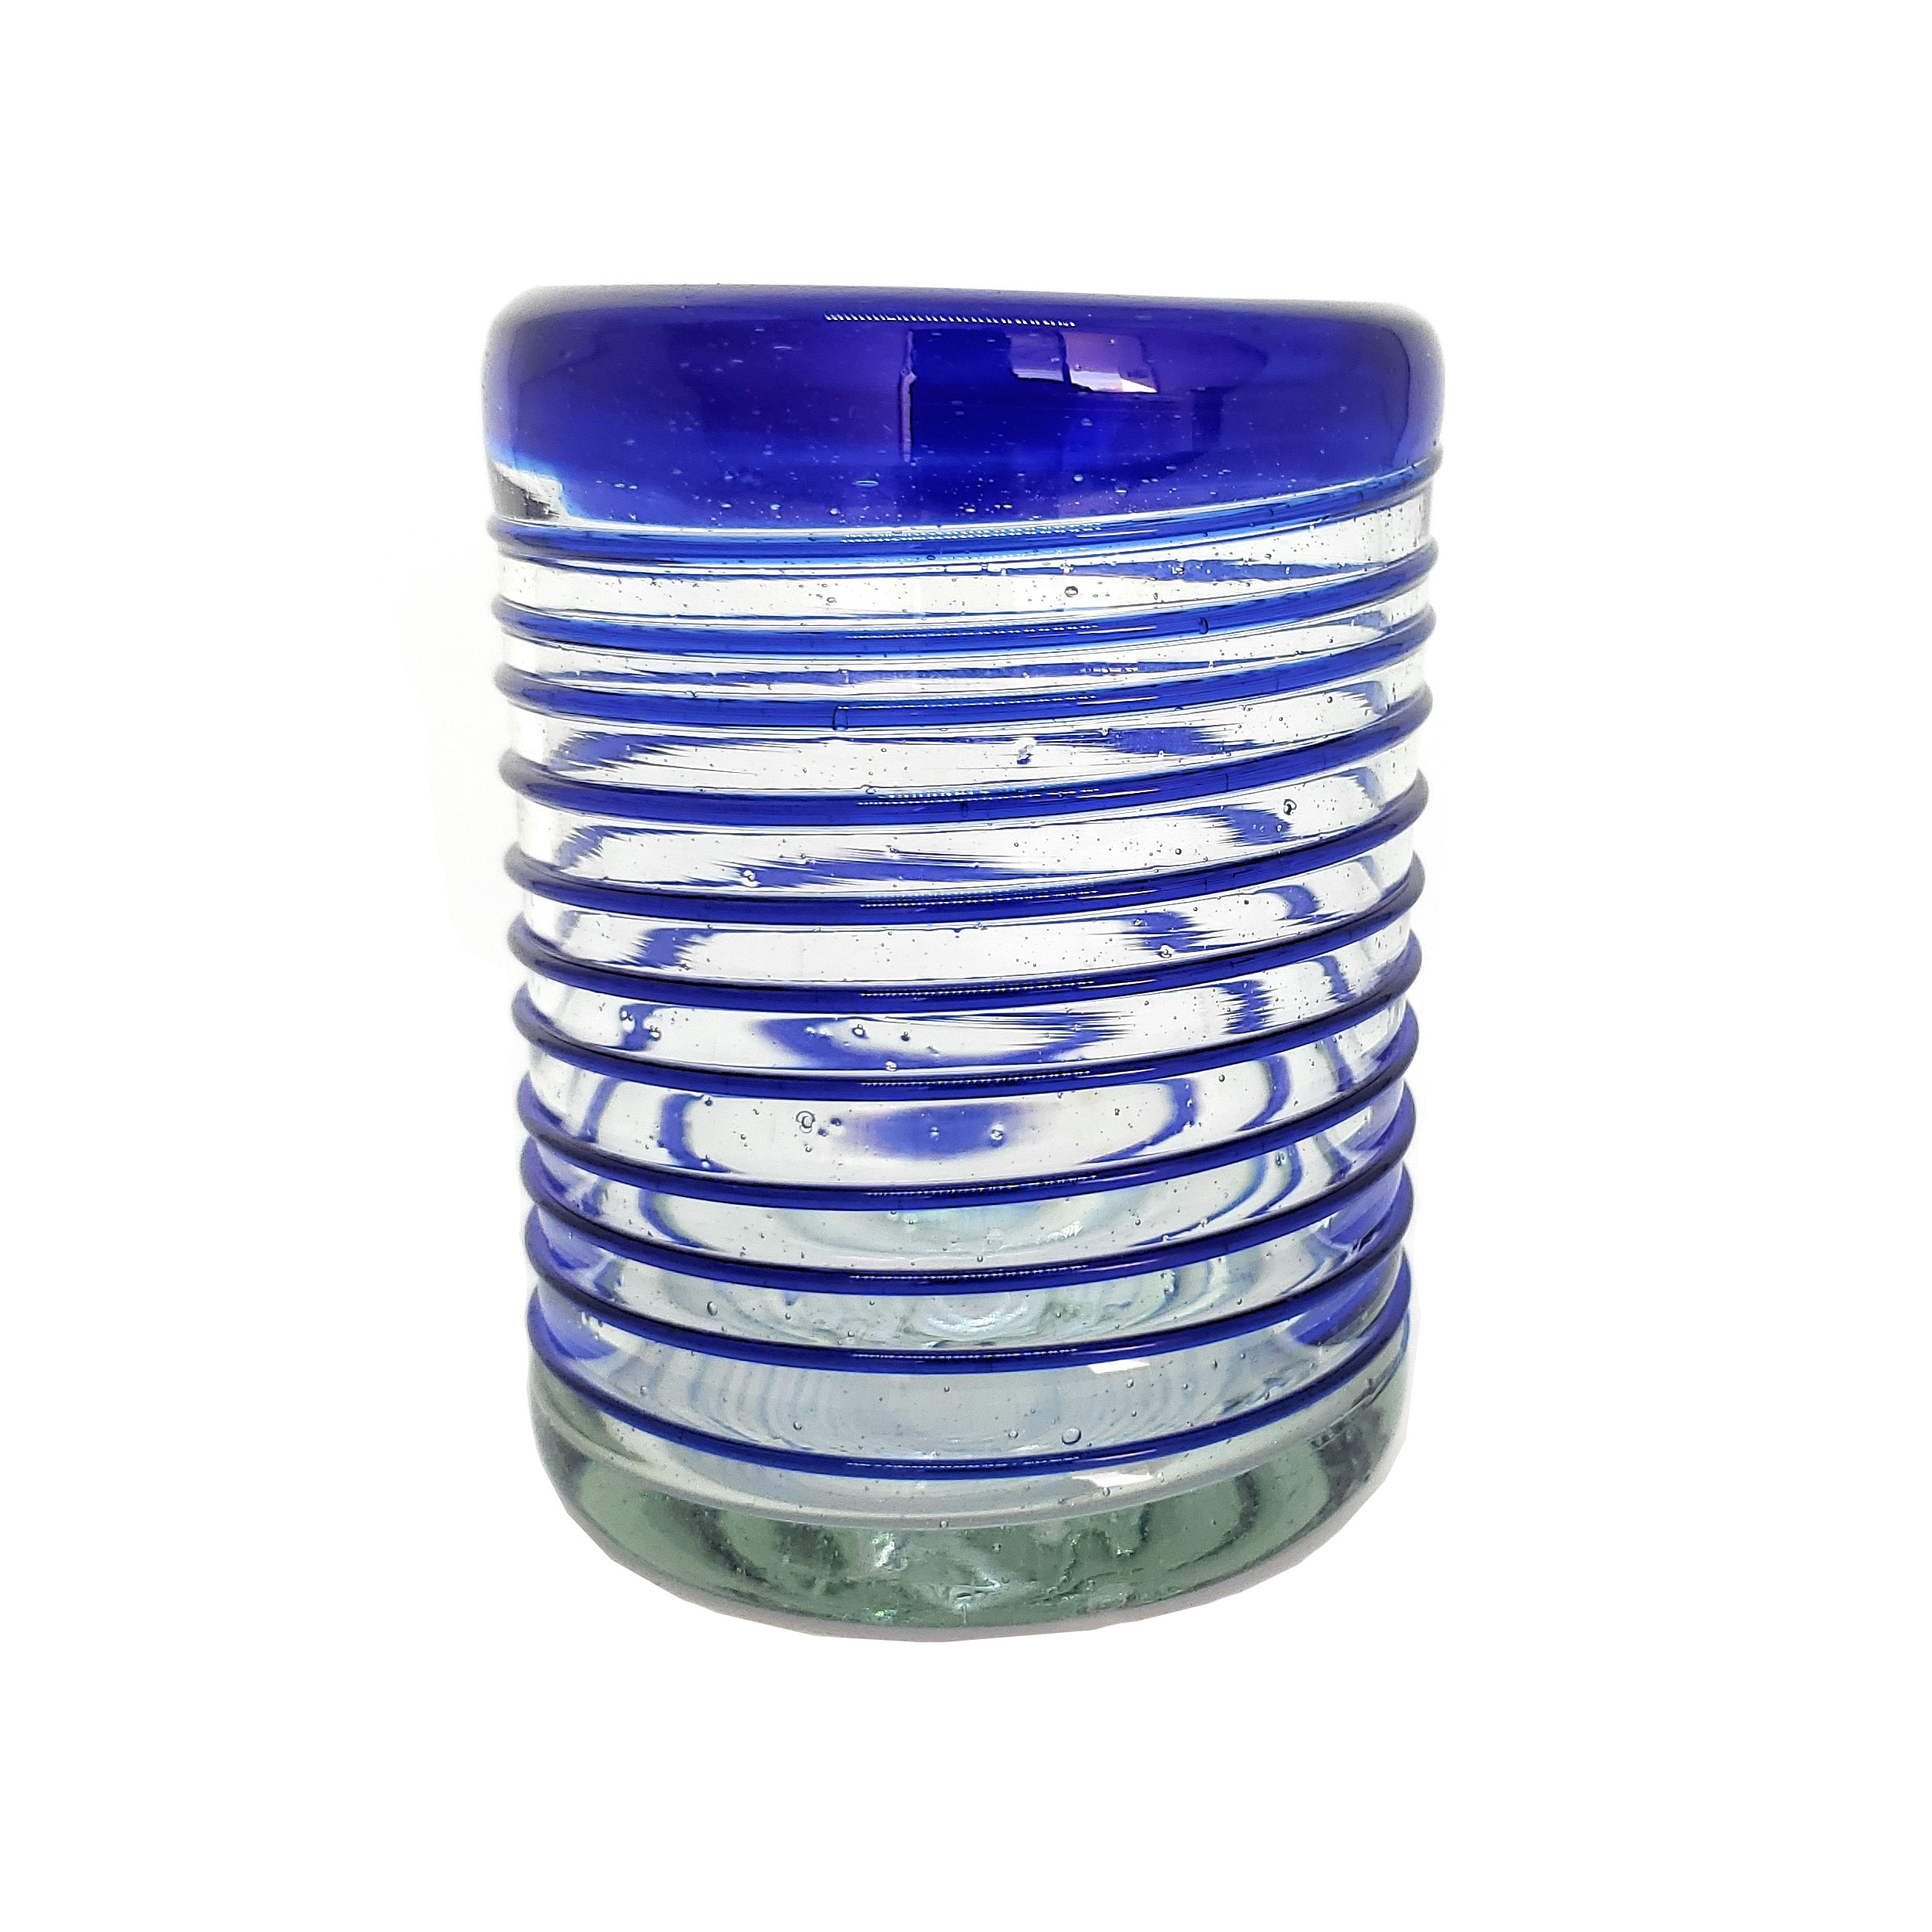 Sale Items / Cobalt Blue Spiral 10 oz Tumblers  / This festive set of tumblers is great for a glass of milk with cookies or a lemonade on a hot summer day.